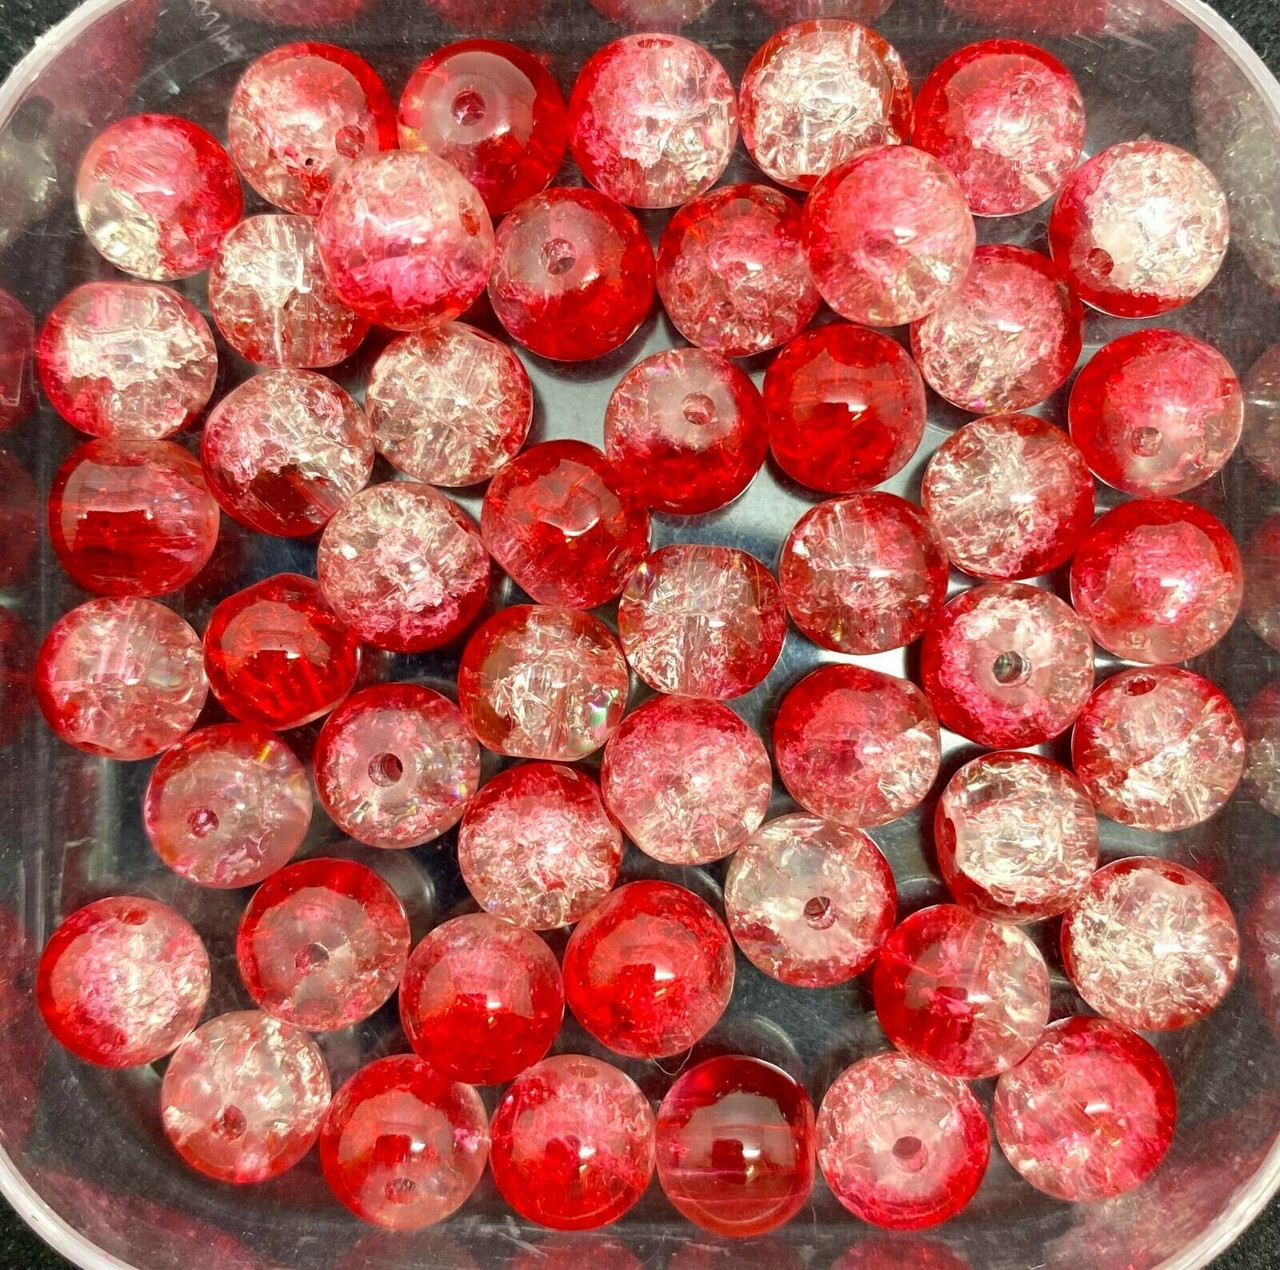 10mm Crackle Glass Beads - Red & Clear, 40 beads